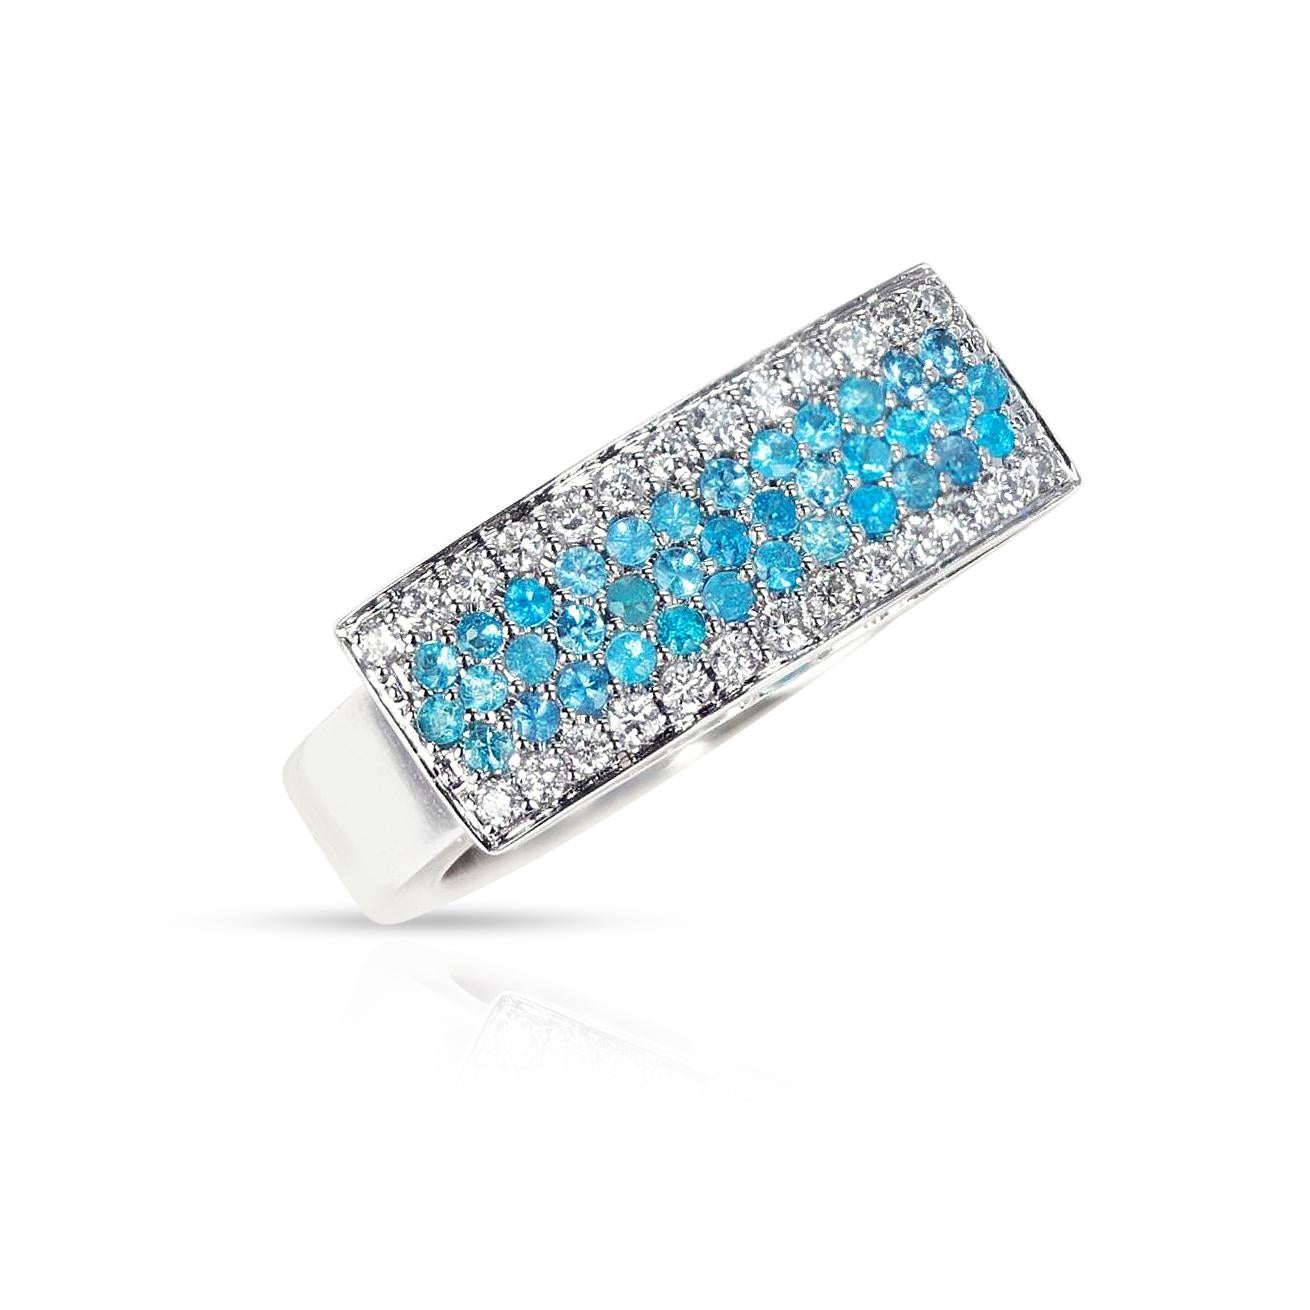 A Five Row Paraiba and Diamond Rectangle Band Ring made in 18 Karat White Gold. The Paraiba weighs 0.39 cts and the diamonds weigh appx. 0.26 cts. The total weight of the ring is 9.80 grams. The ring size is US 6.50.